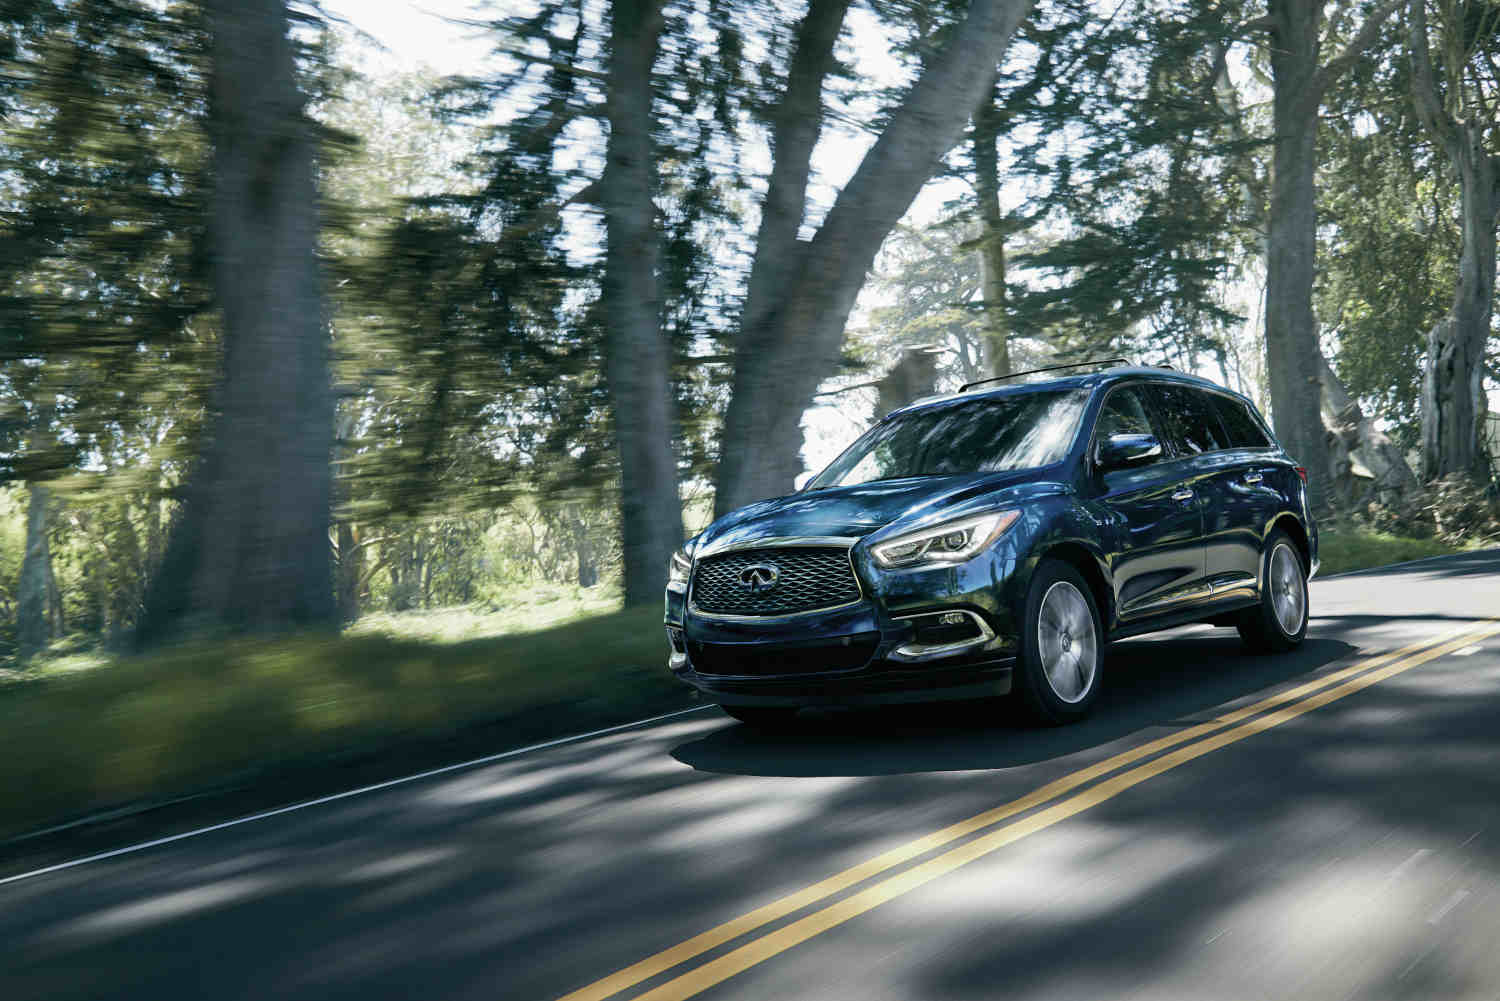 The Infiniti QX60 is a good family SUV